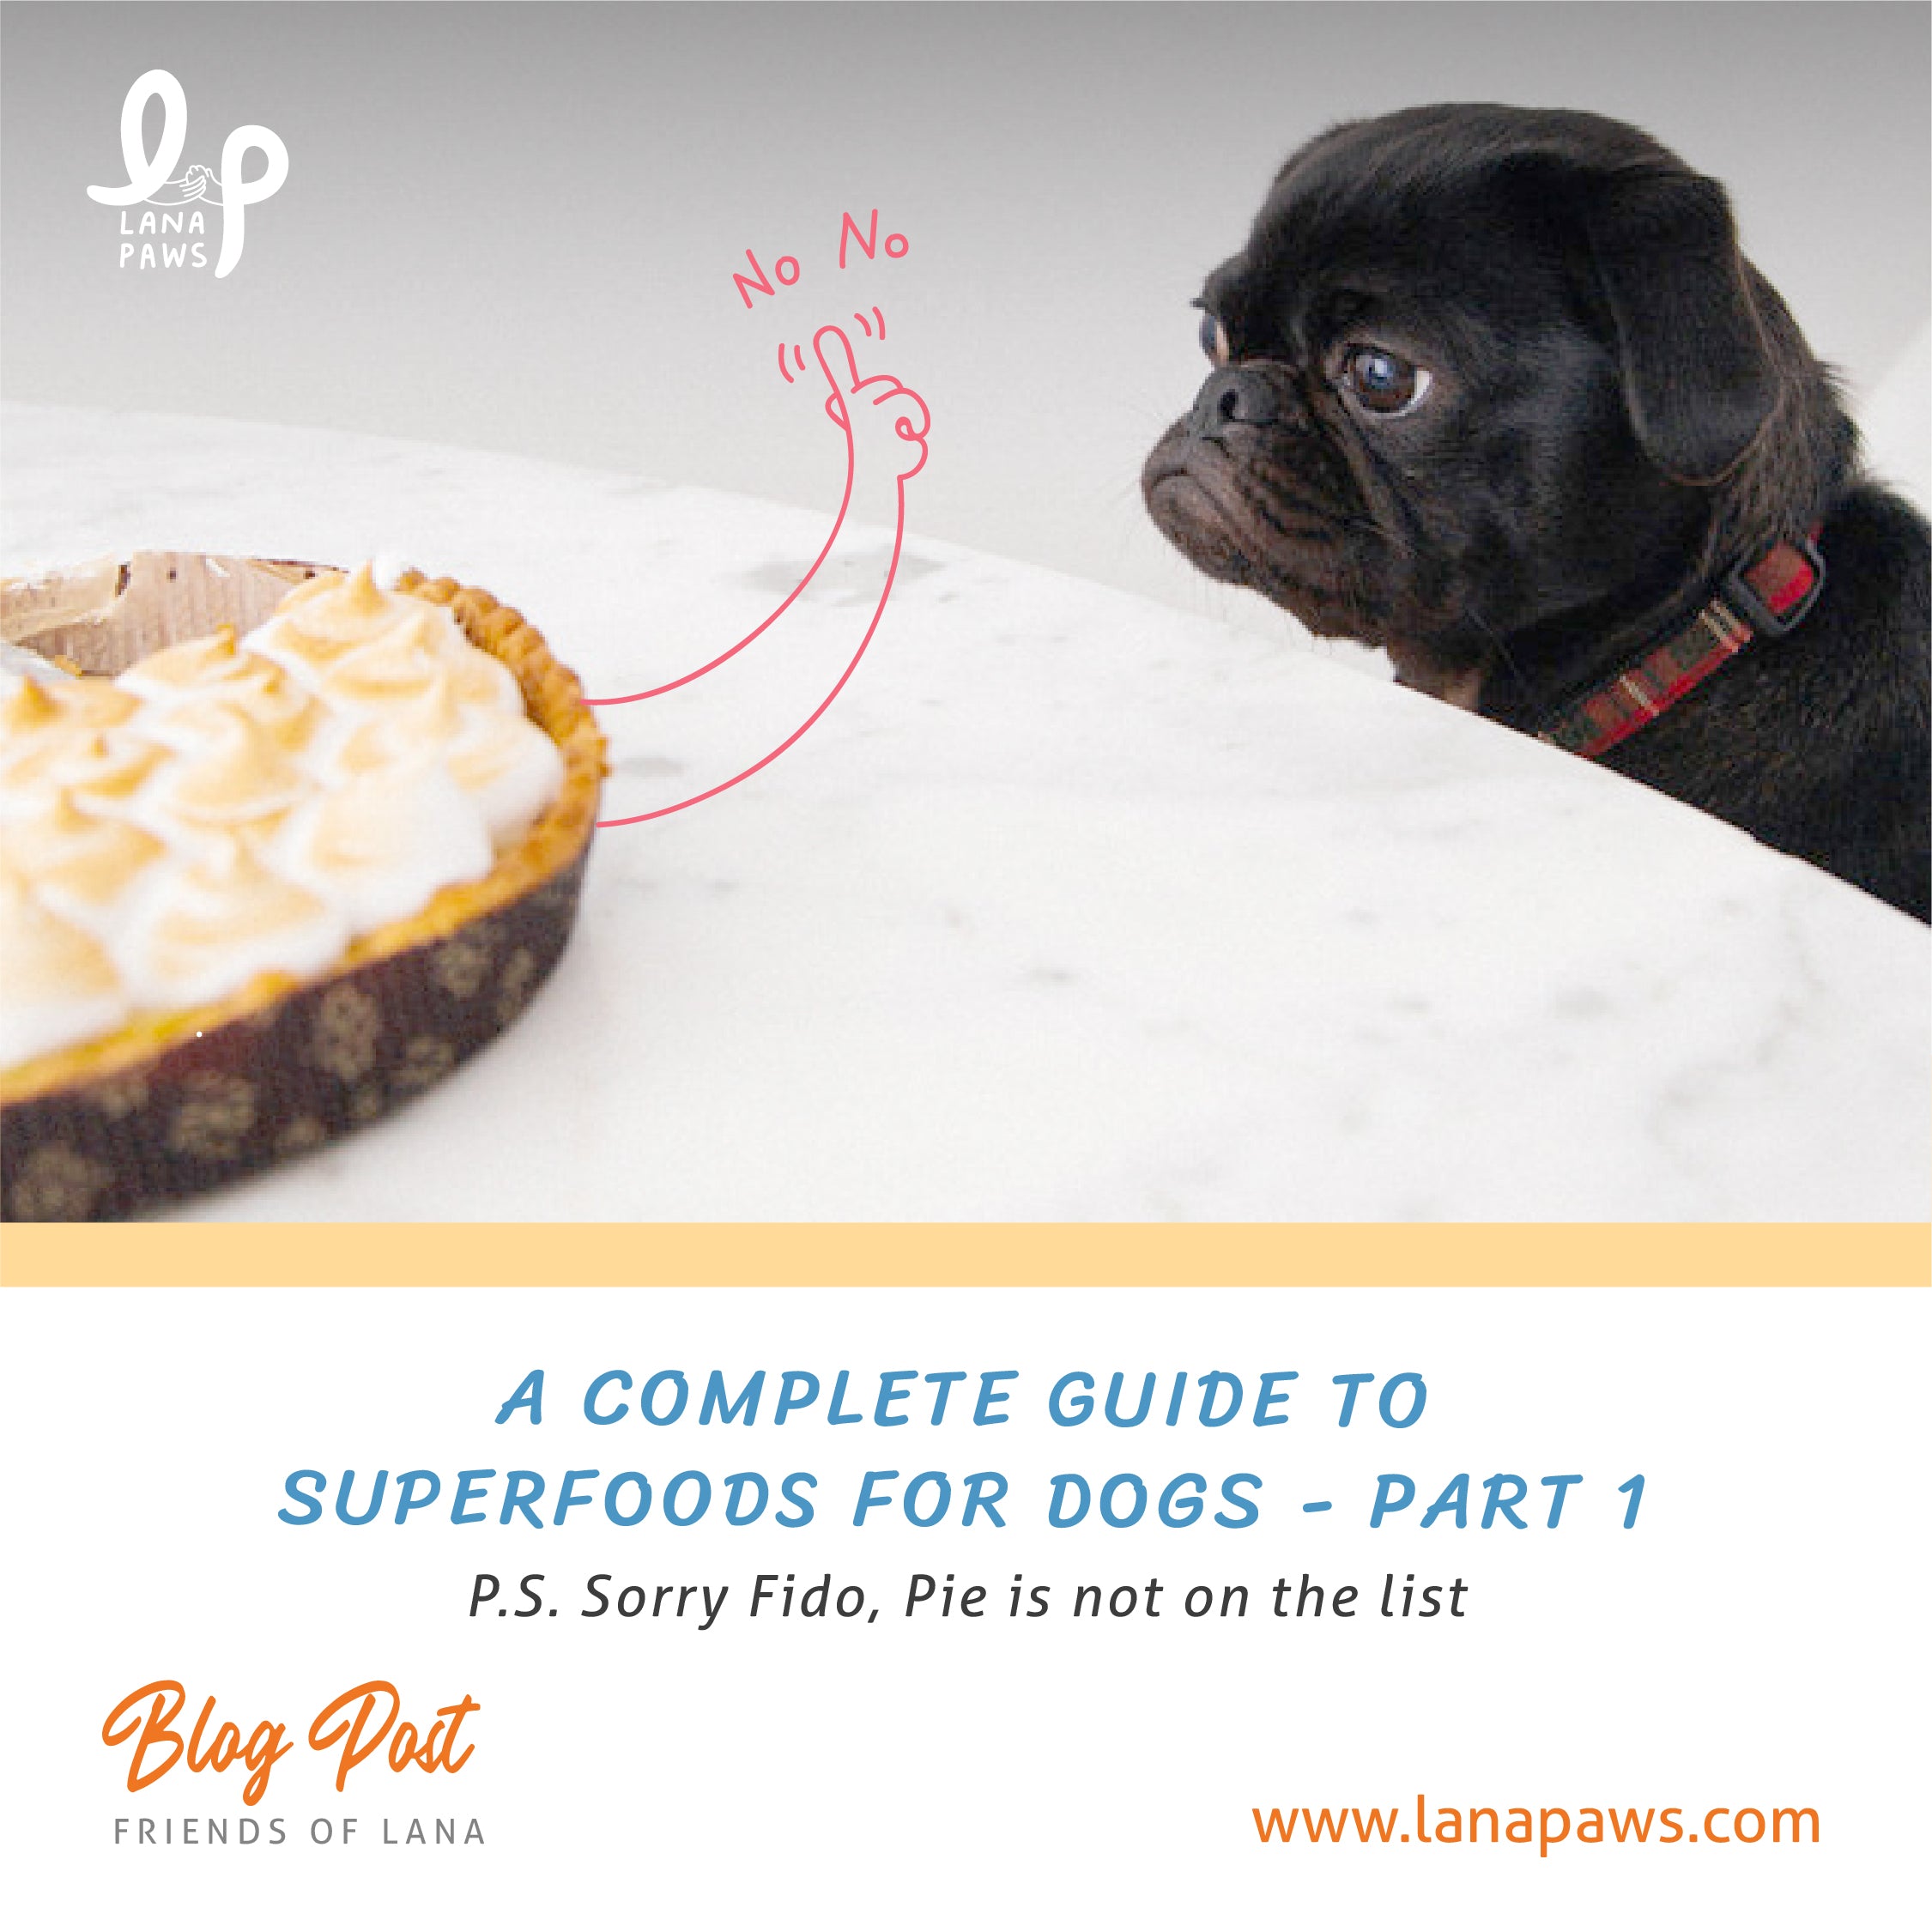 Lana Paws blog post on superfoods for dogs